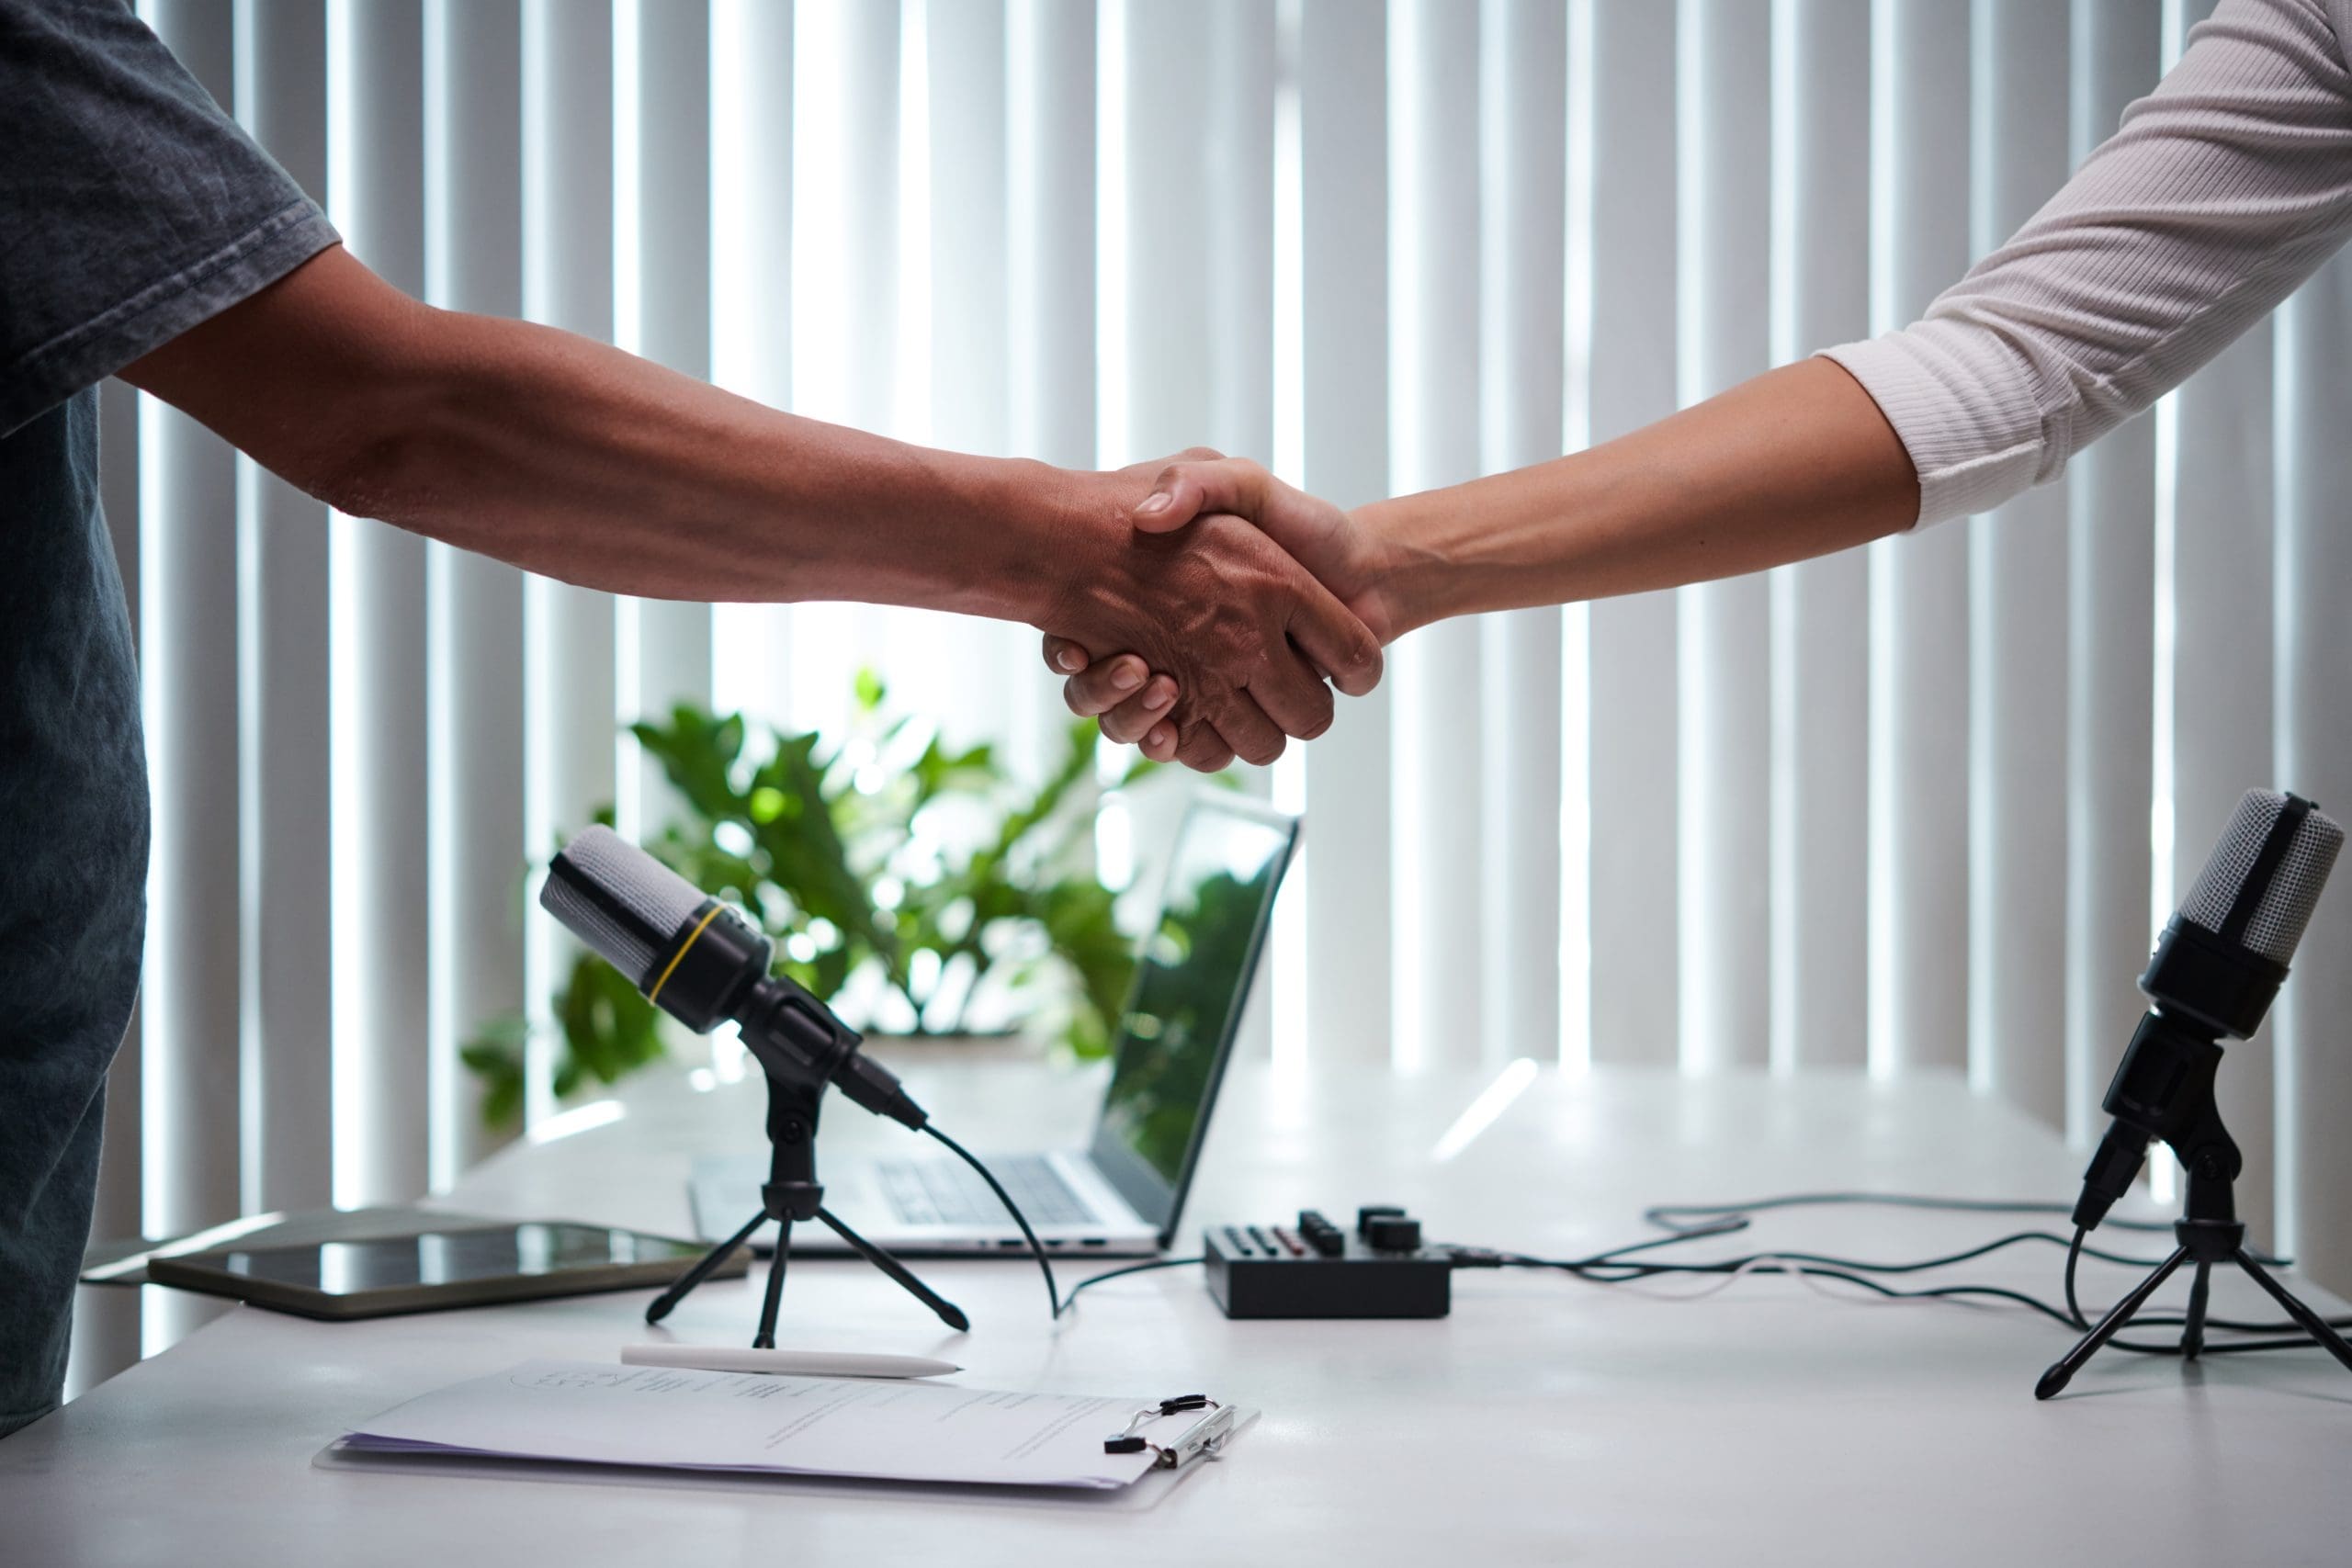 Two people shaking hands in front of microphones discussing podcasting and reputation management.